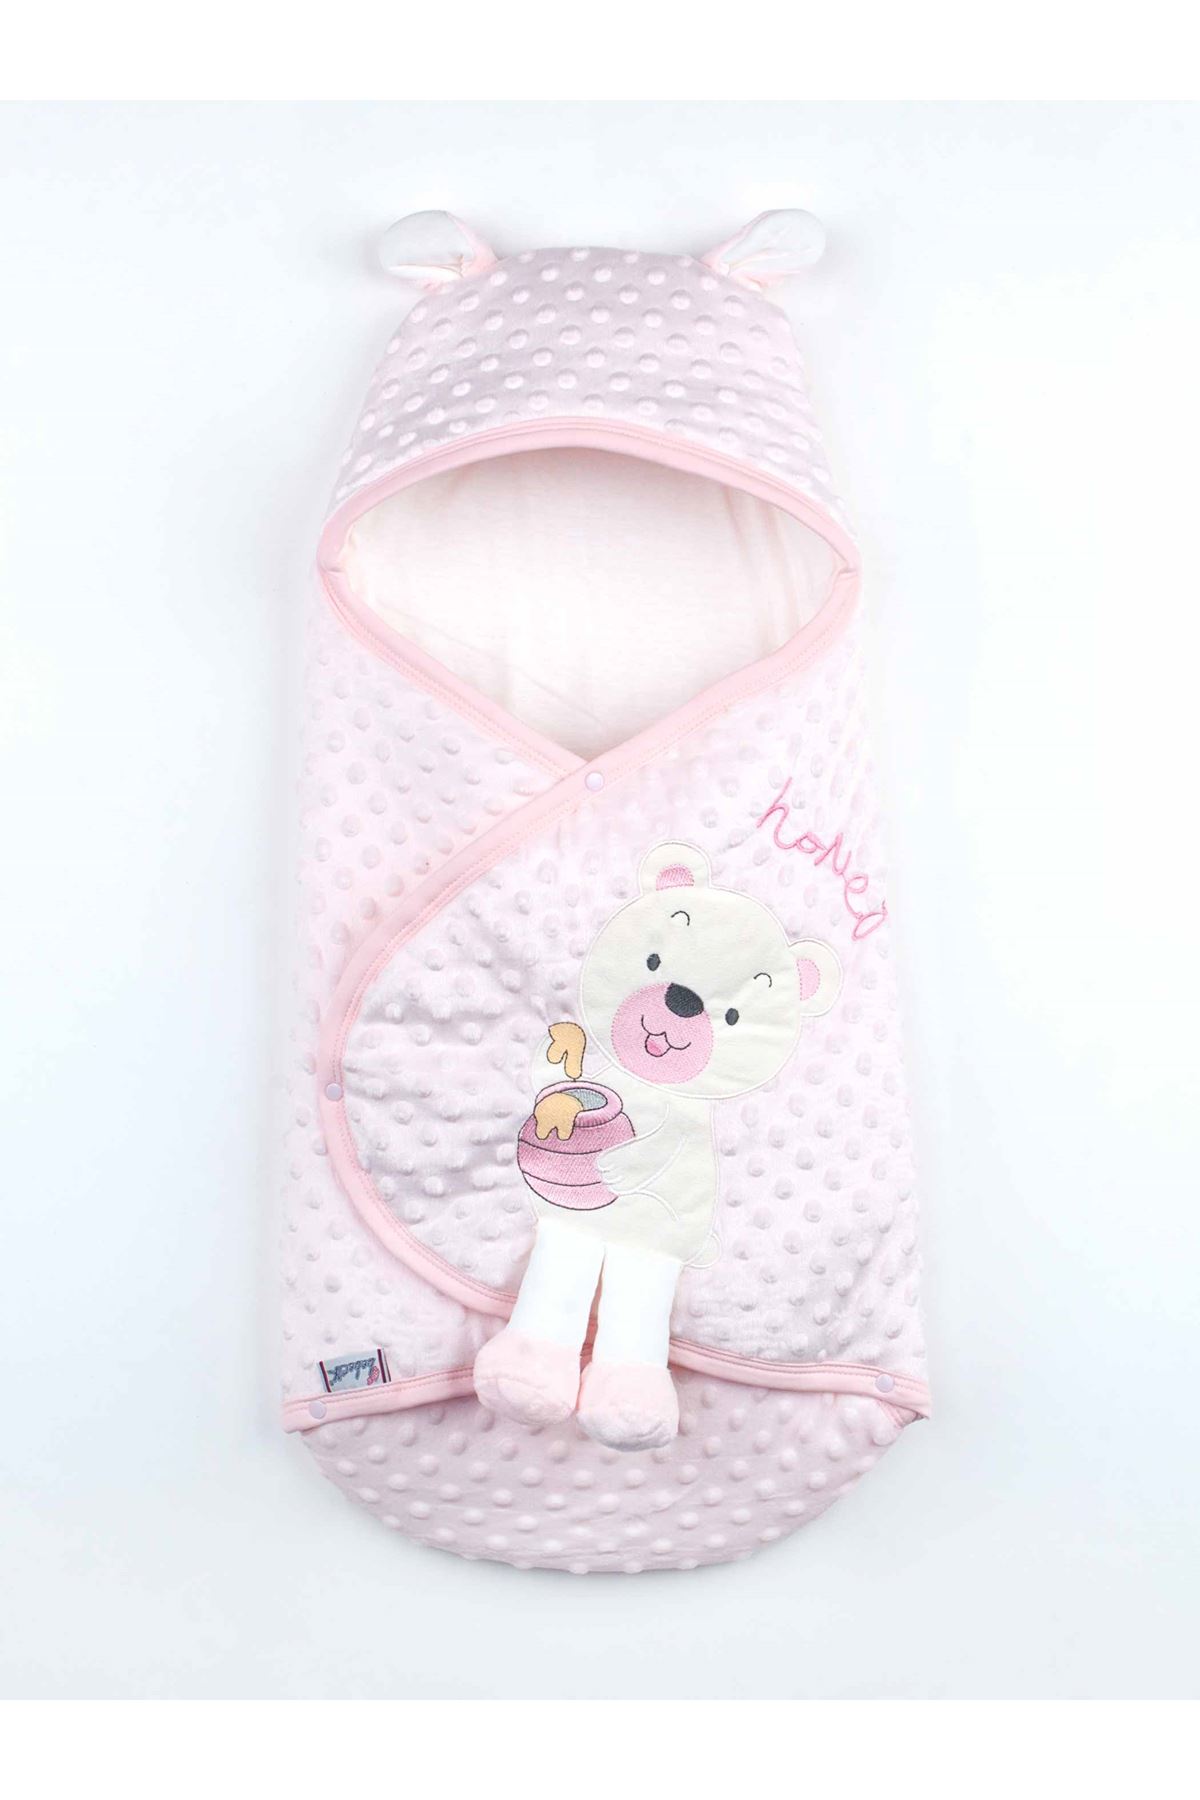 Pink Baby Girl Swaddle Hospital Outlet Newborn Teddy Chickpea Pattern Cotton Soft Baby Stroller Bed Models